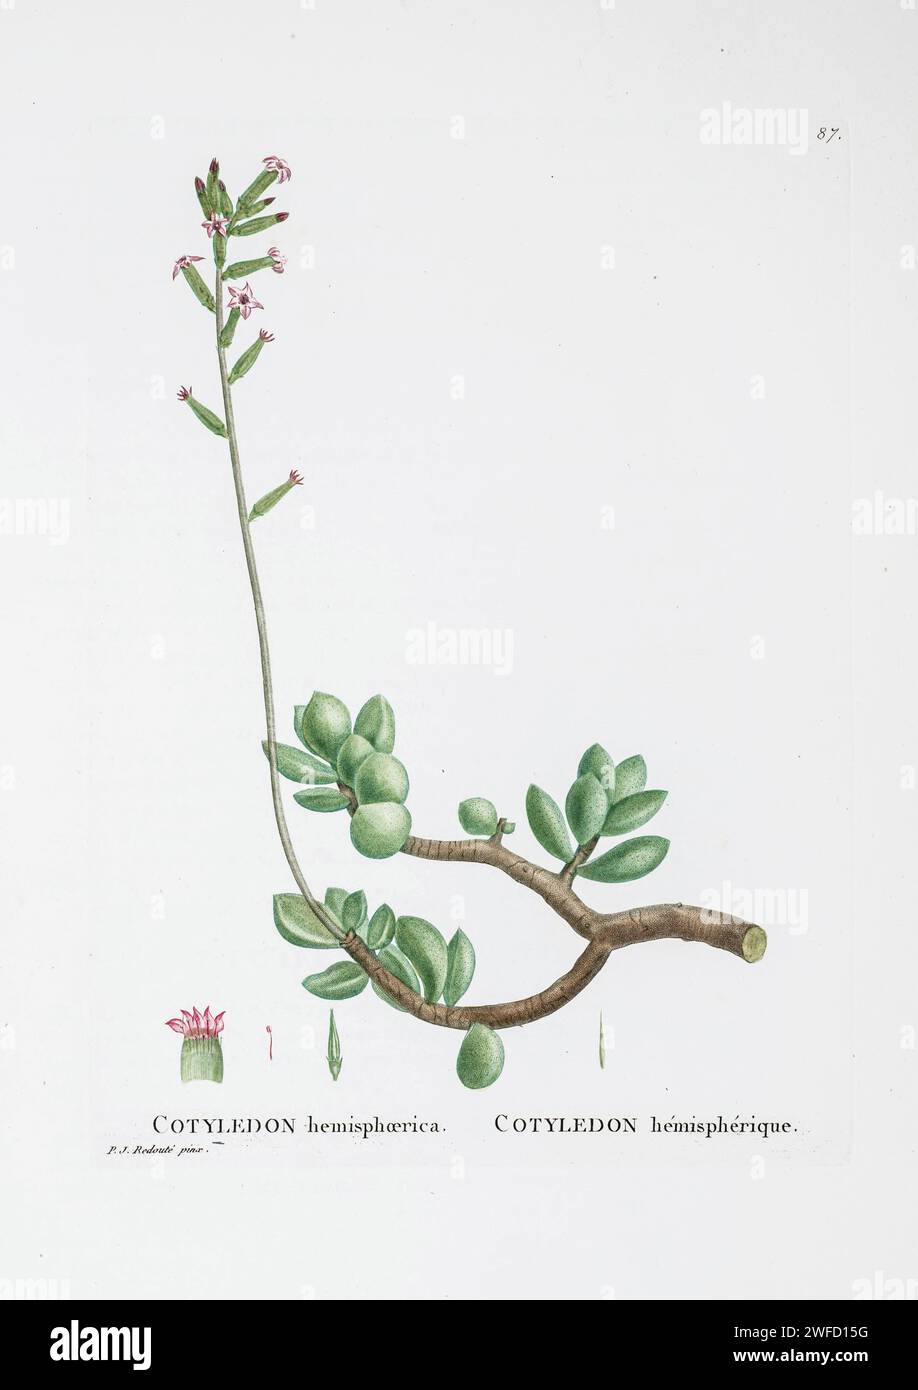 Adromischus hemisphaericus (L.) Lem. Here As Cotyledon hemisphaerica from History of Succulent Plants [Plantarum historia succulentarum / Histoire des plantes grasses] painted by Pierre-Joseph Redouté and described by Augustin Pyramus de Candolle 1799 Adromischus hemisphaericus is a perennial, succulent plant in the Crassulaceae family. It is commonly called Brosplakkies. The species is endemic to the Western Cape, South Africa. Stock Photo